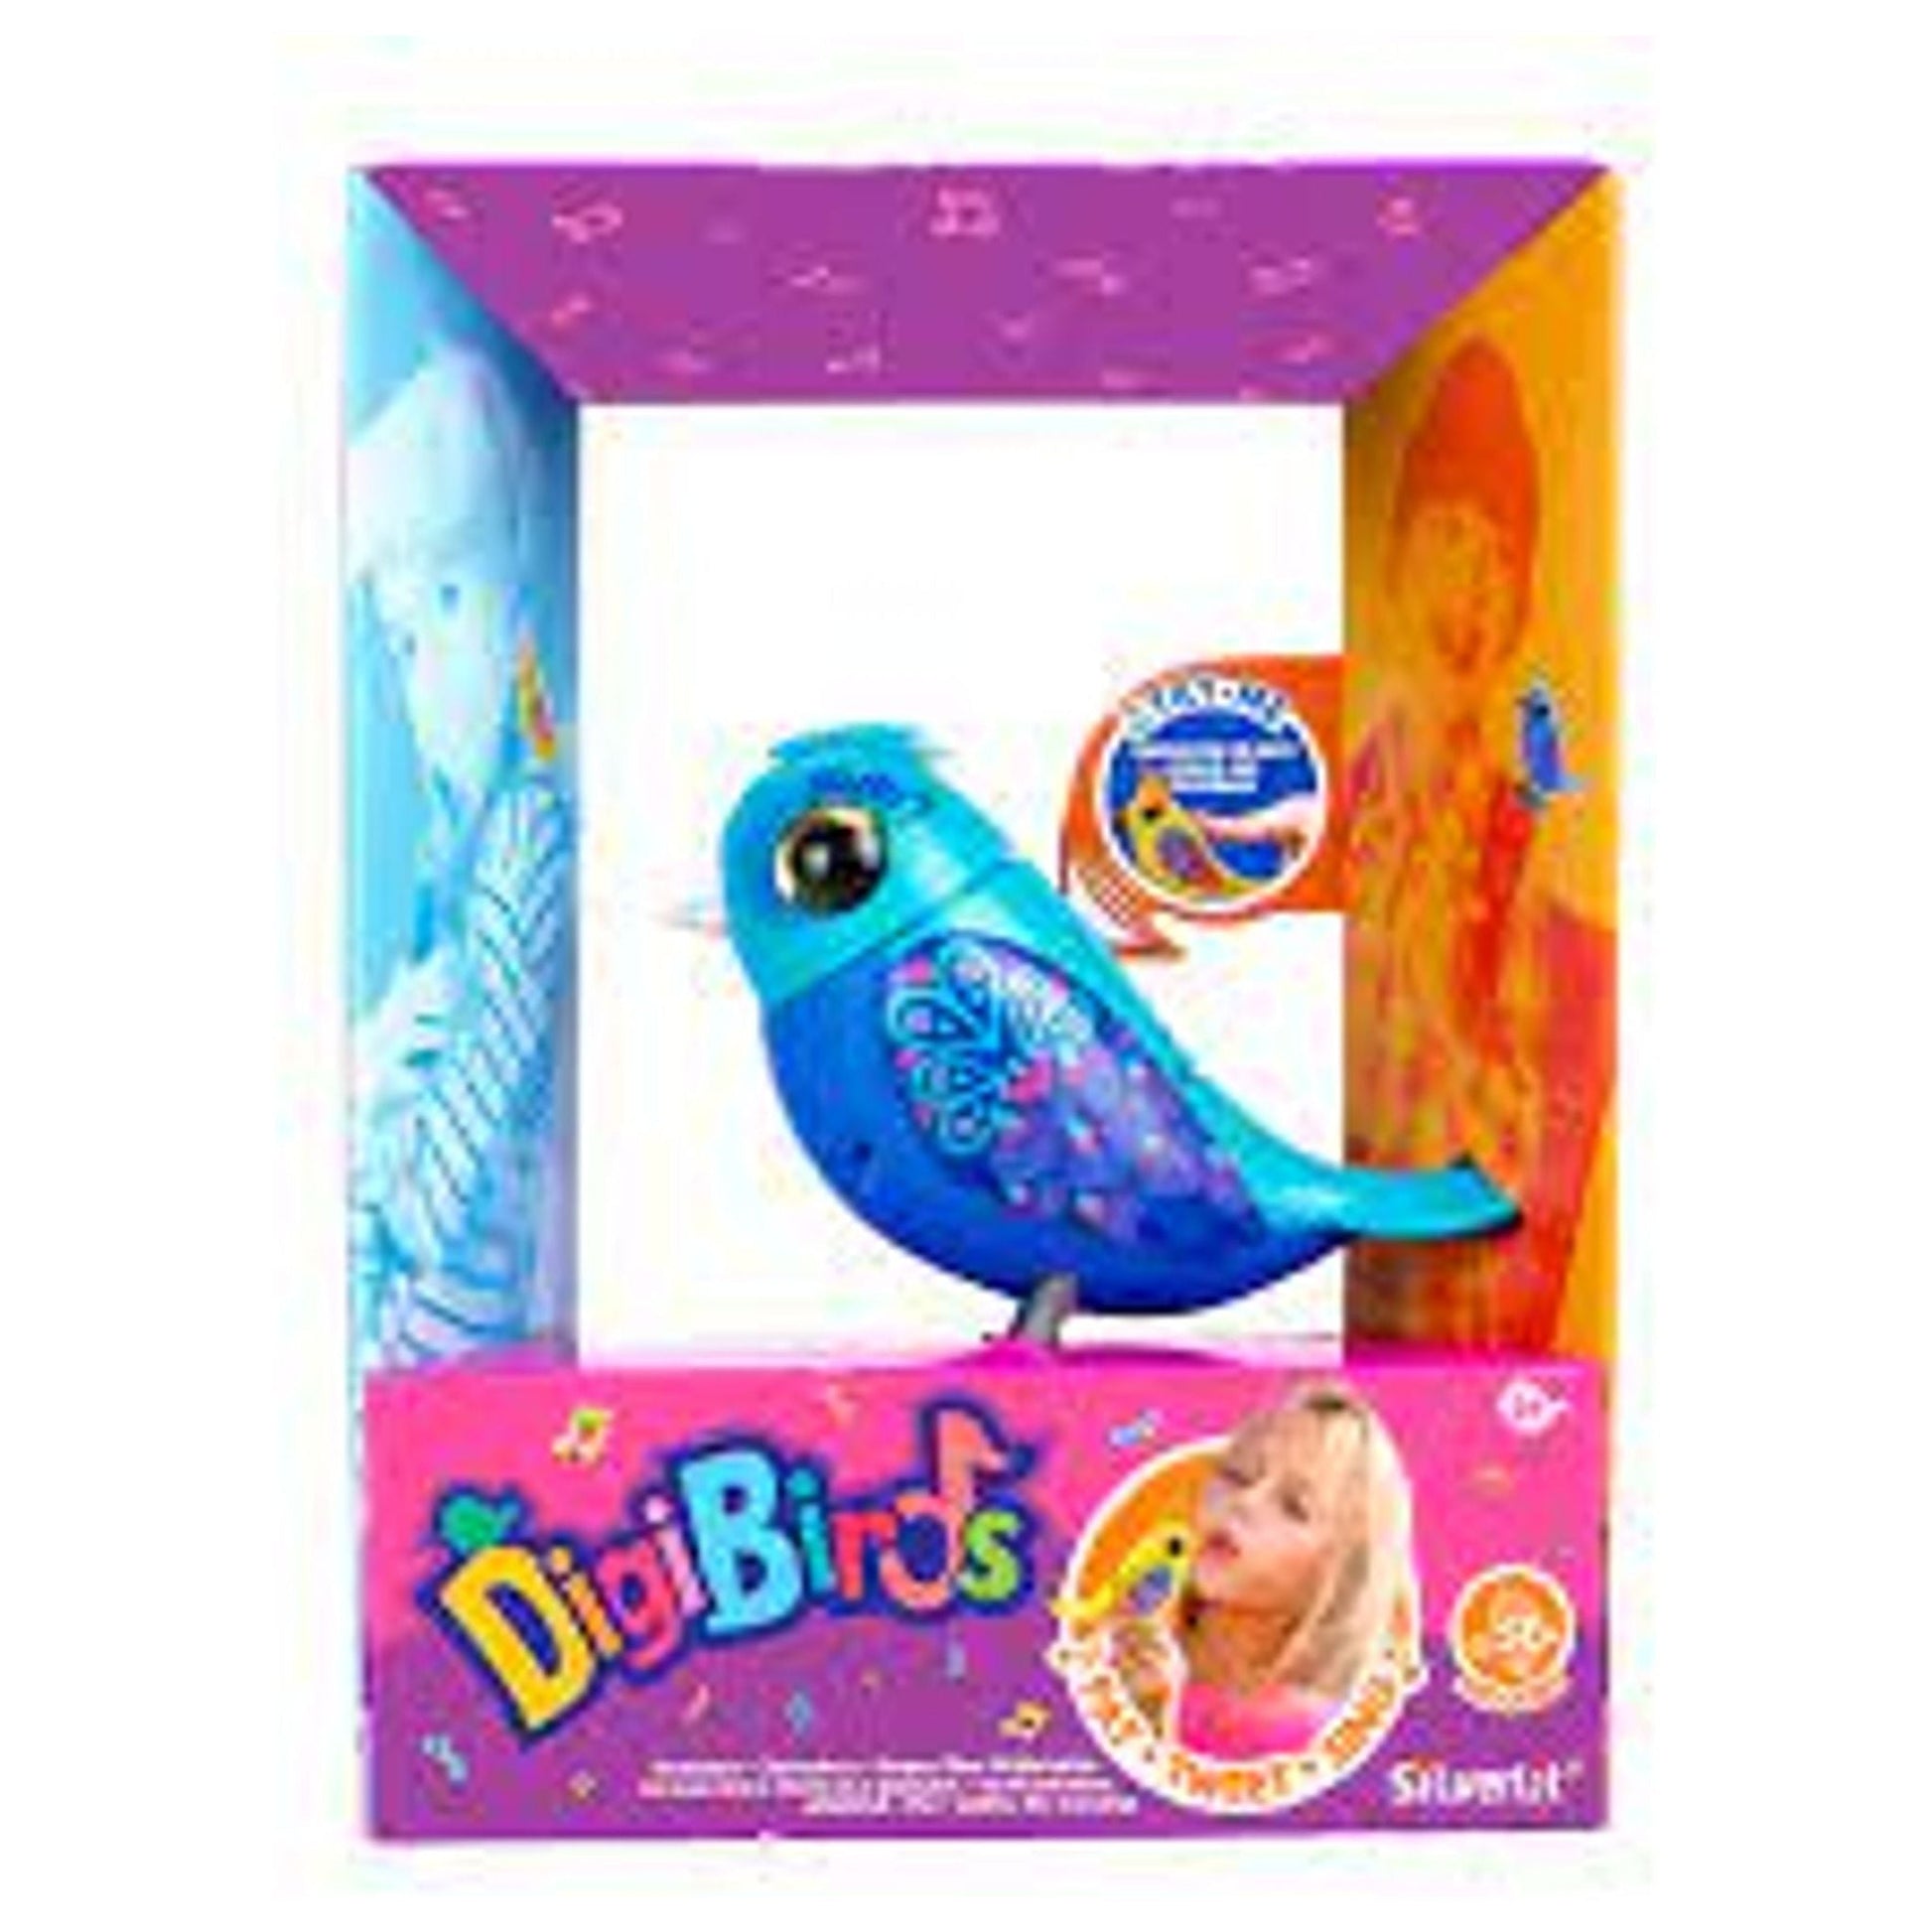 SILVERLIT Digibirds II Single Pack Series 2 (Assorted) - Toybox Tales